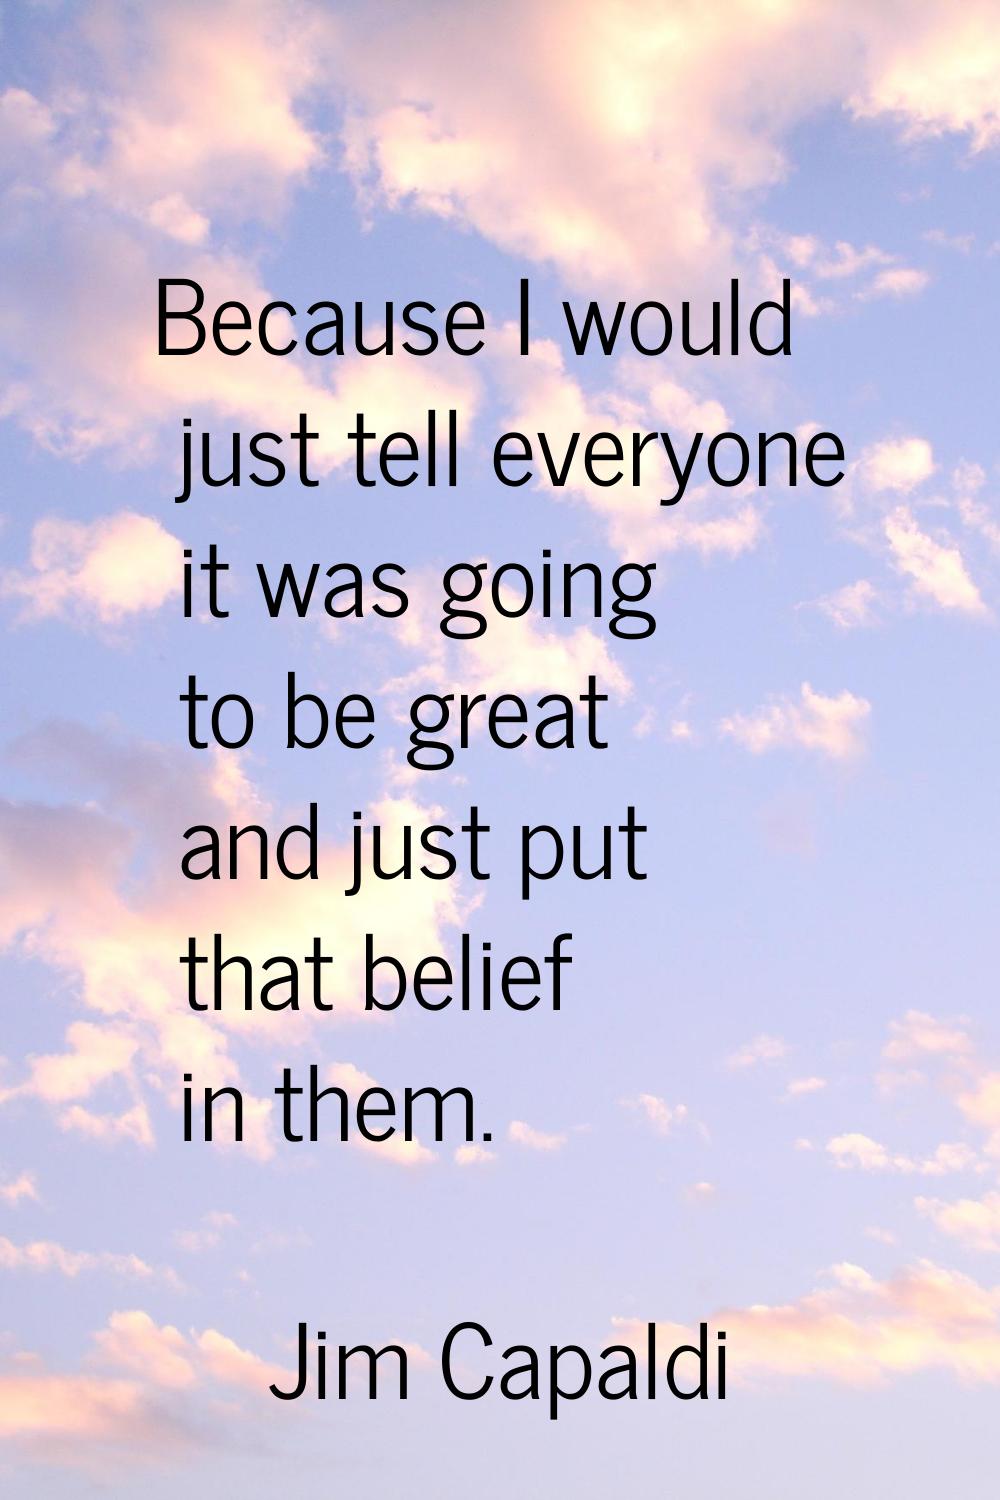 Because I would just tell everyone it was going to be great and just put that belief in them.